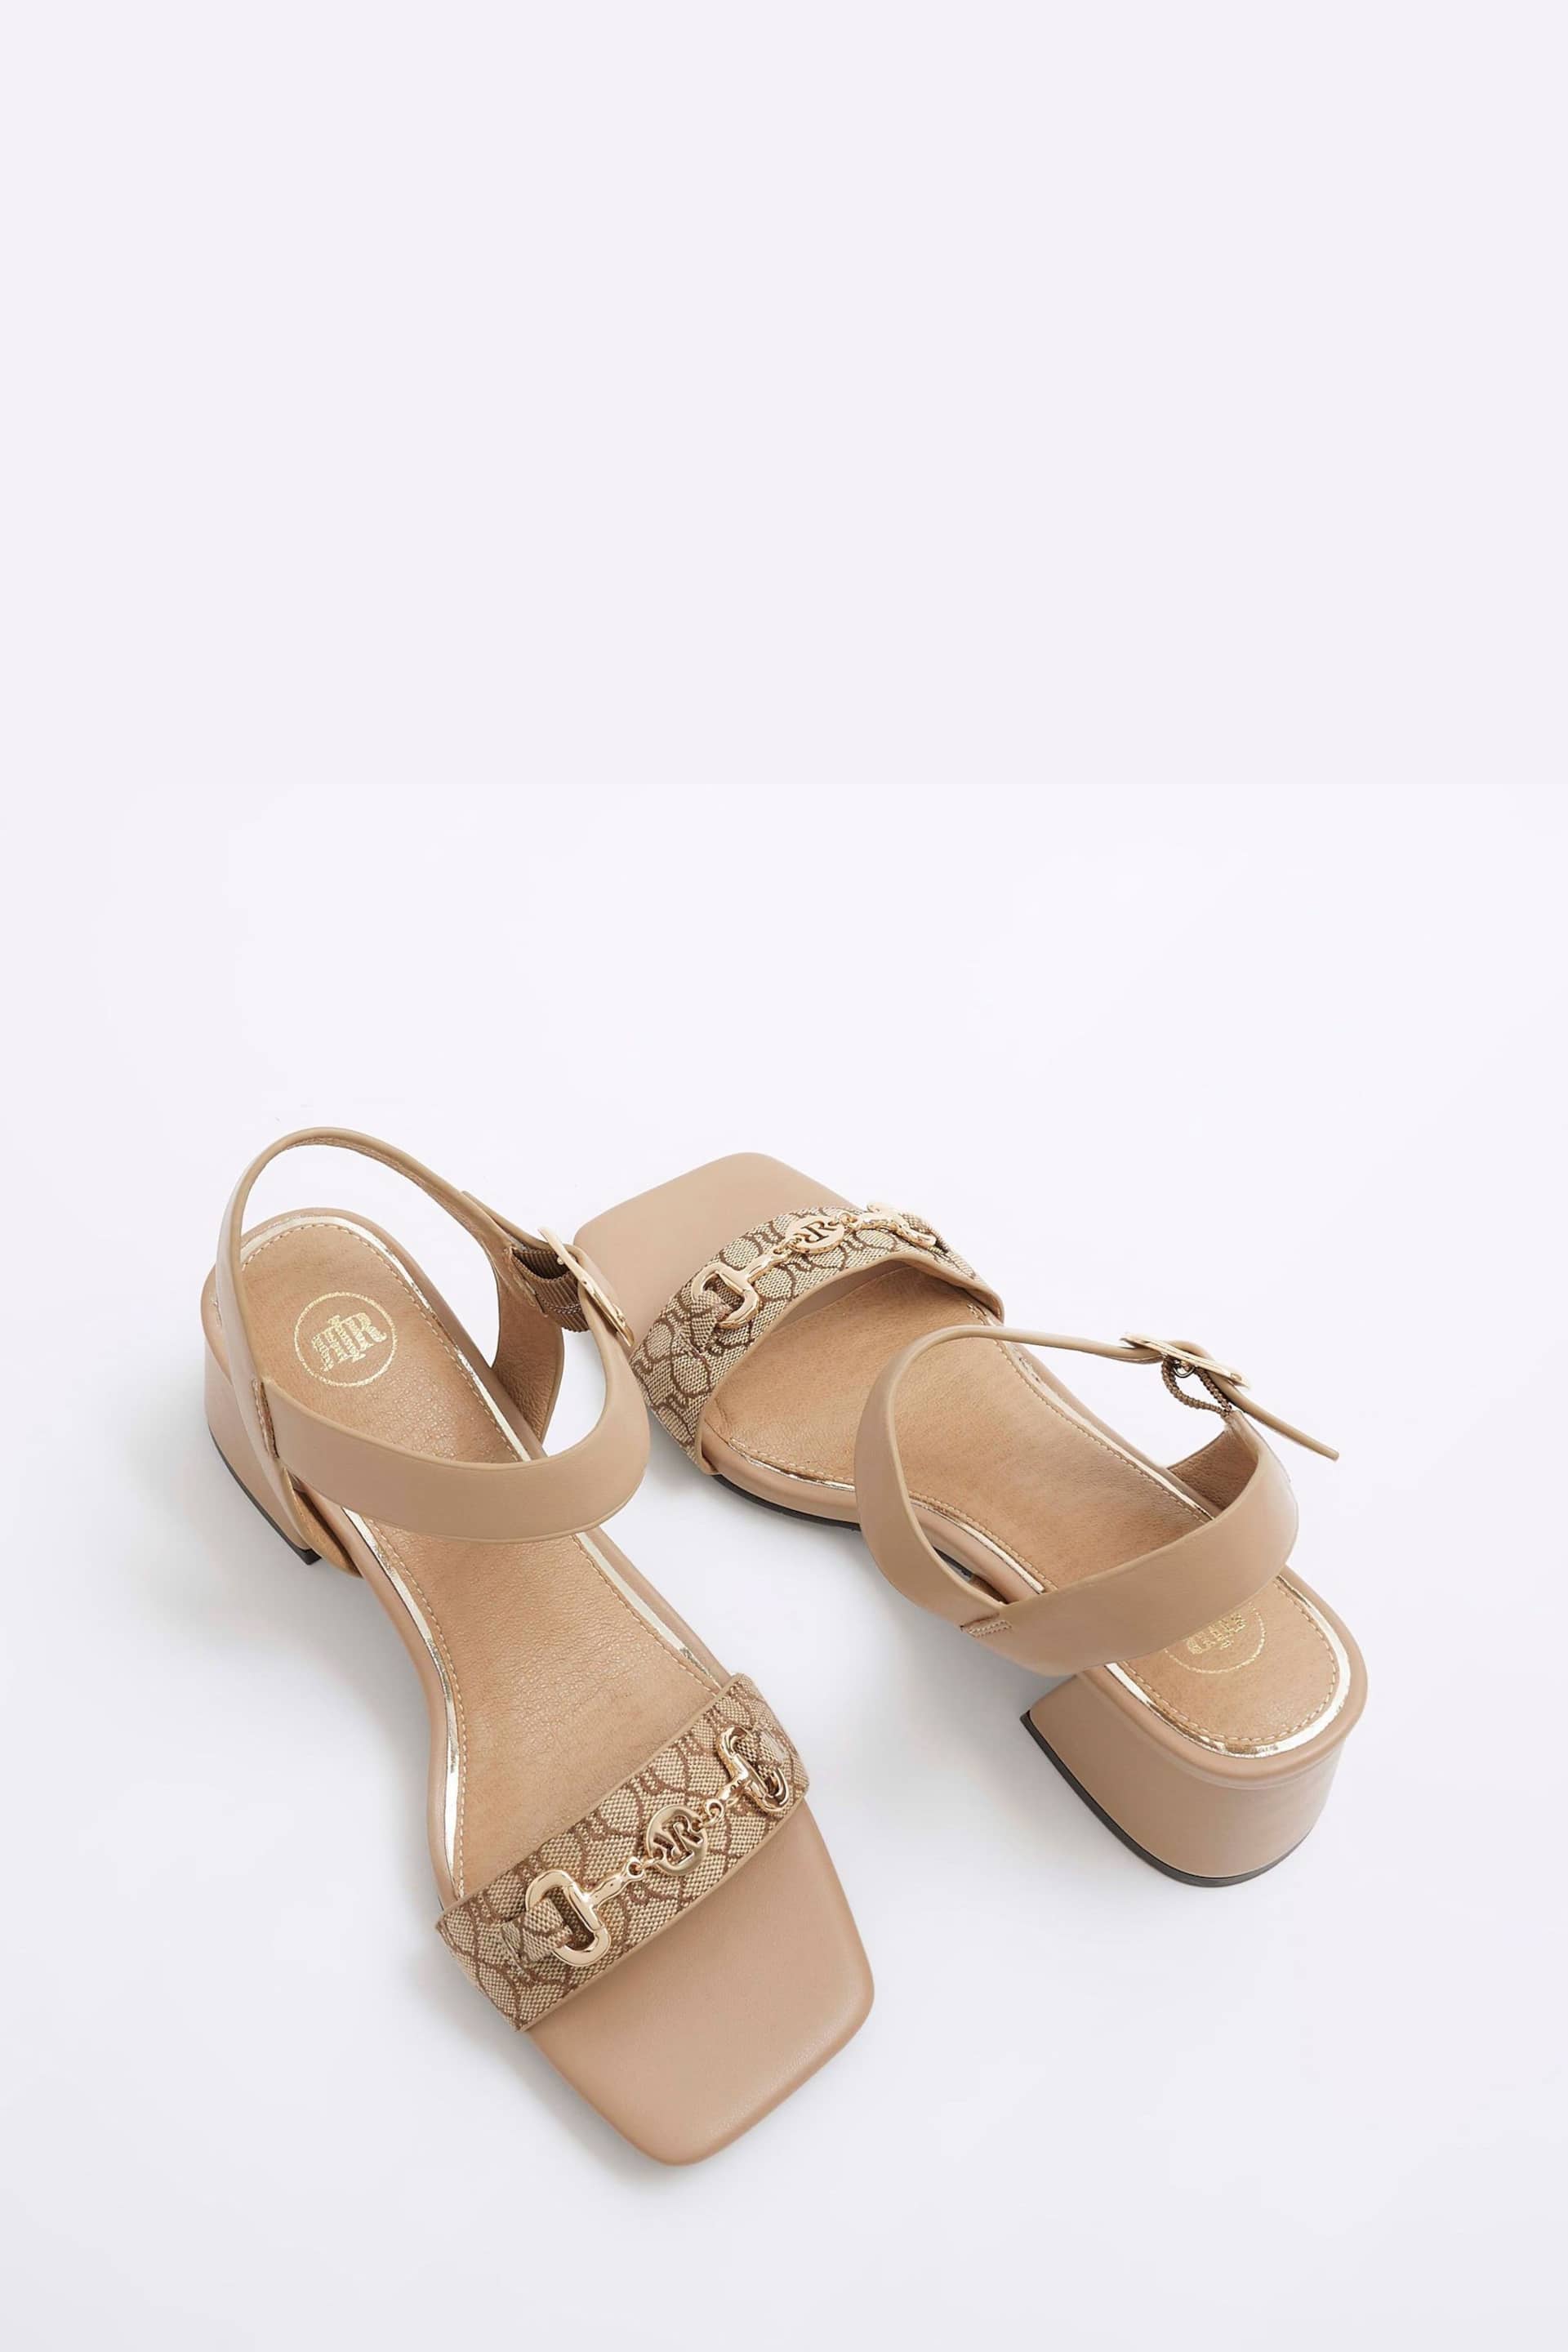 River Island Brown Snaffle Low Block Heeled Sandals - Image 2 of 4